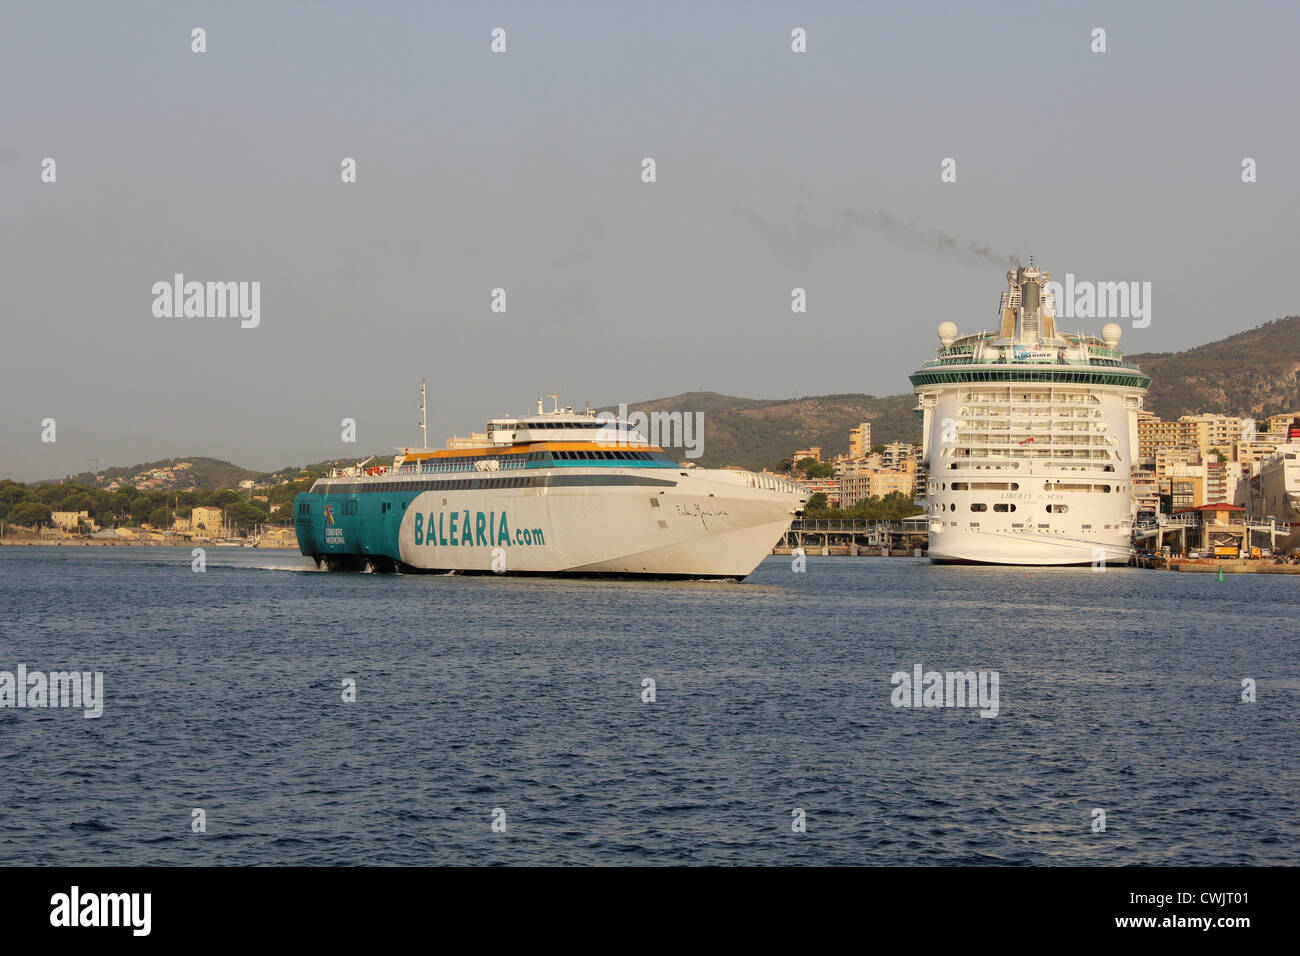 Balearia fast ferry 'Federica garcia Lorca' departing port passing recently arrived Cruise Ship 'Liberty of the Seas' Stock Photo